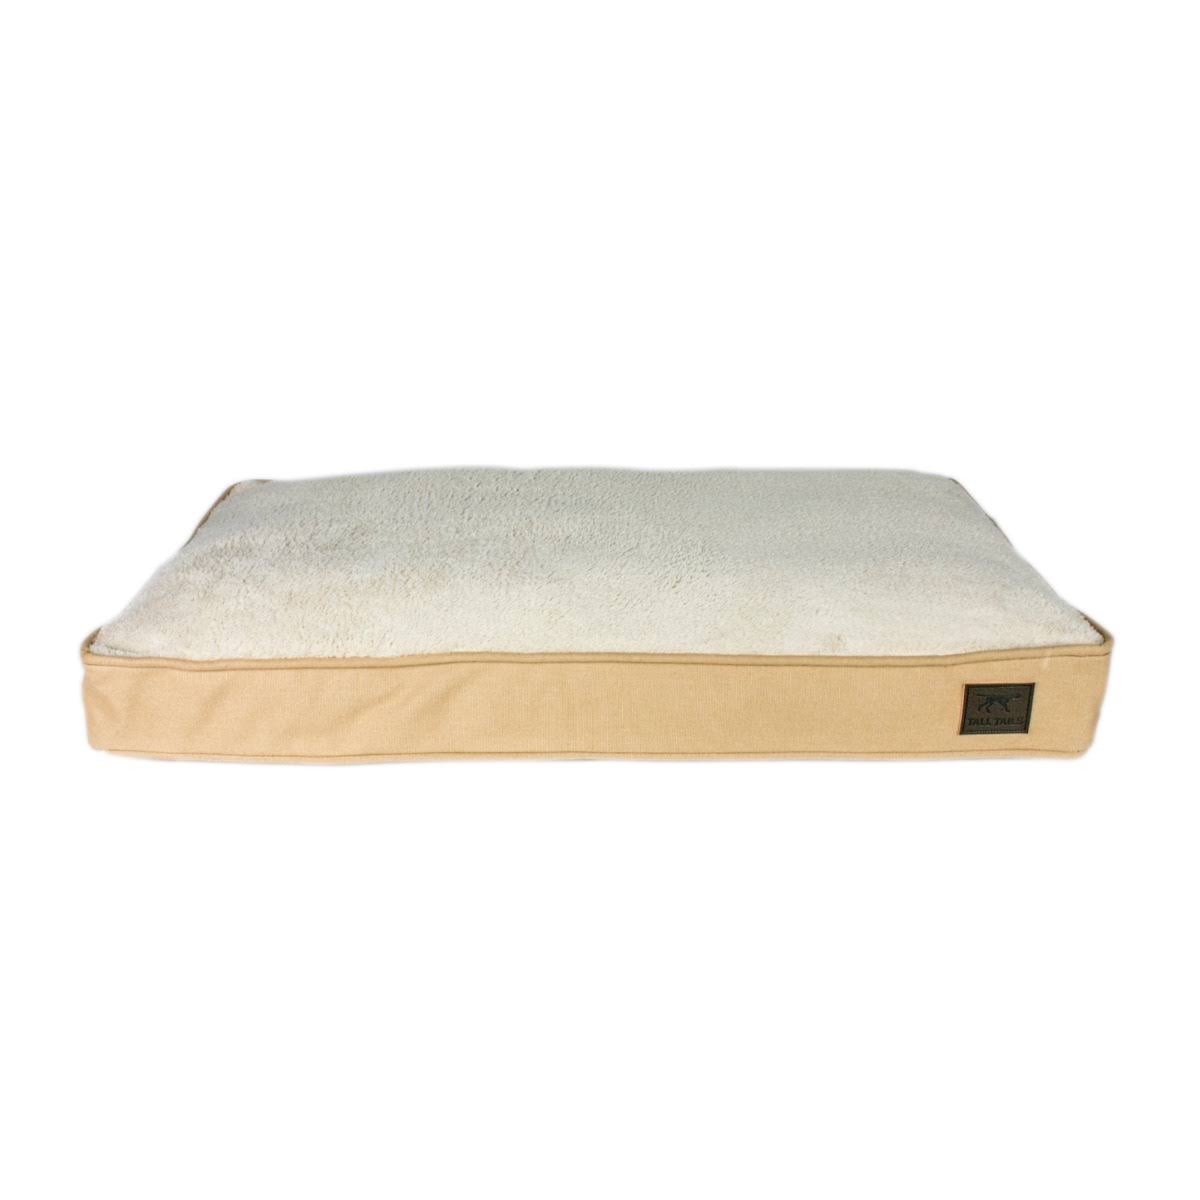 Tall Tails - Dream Chaser Cushion Bed X-Large - Khaki